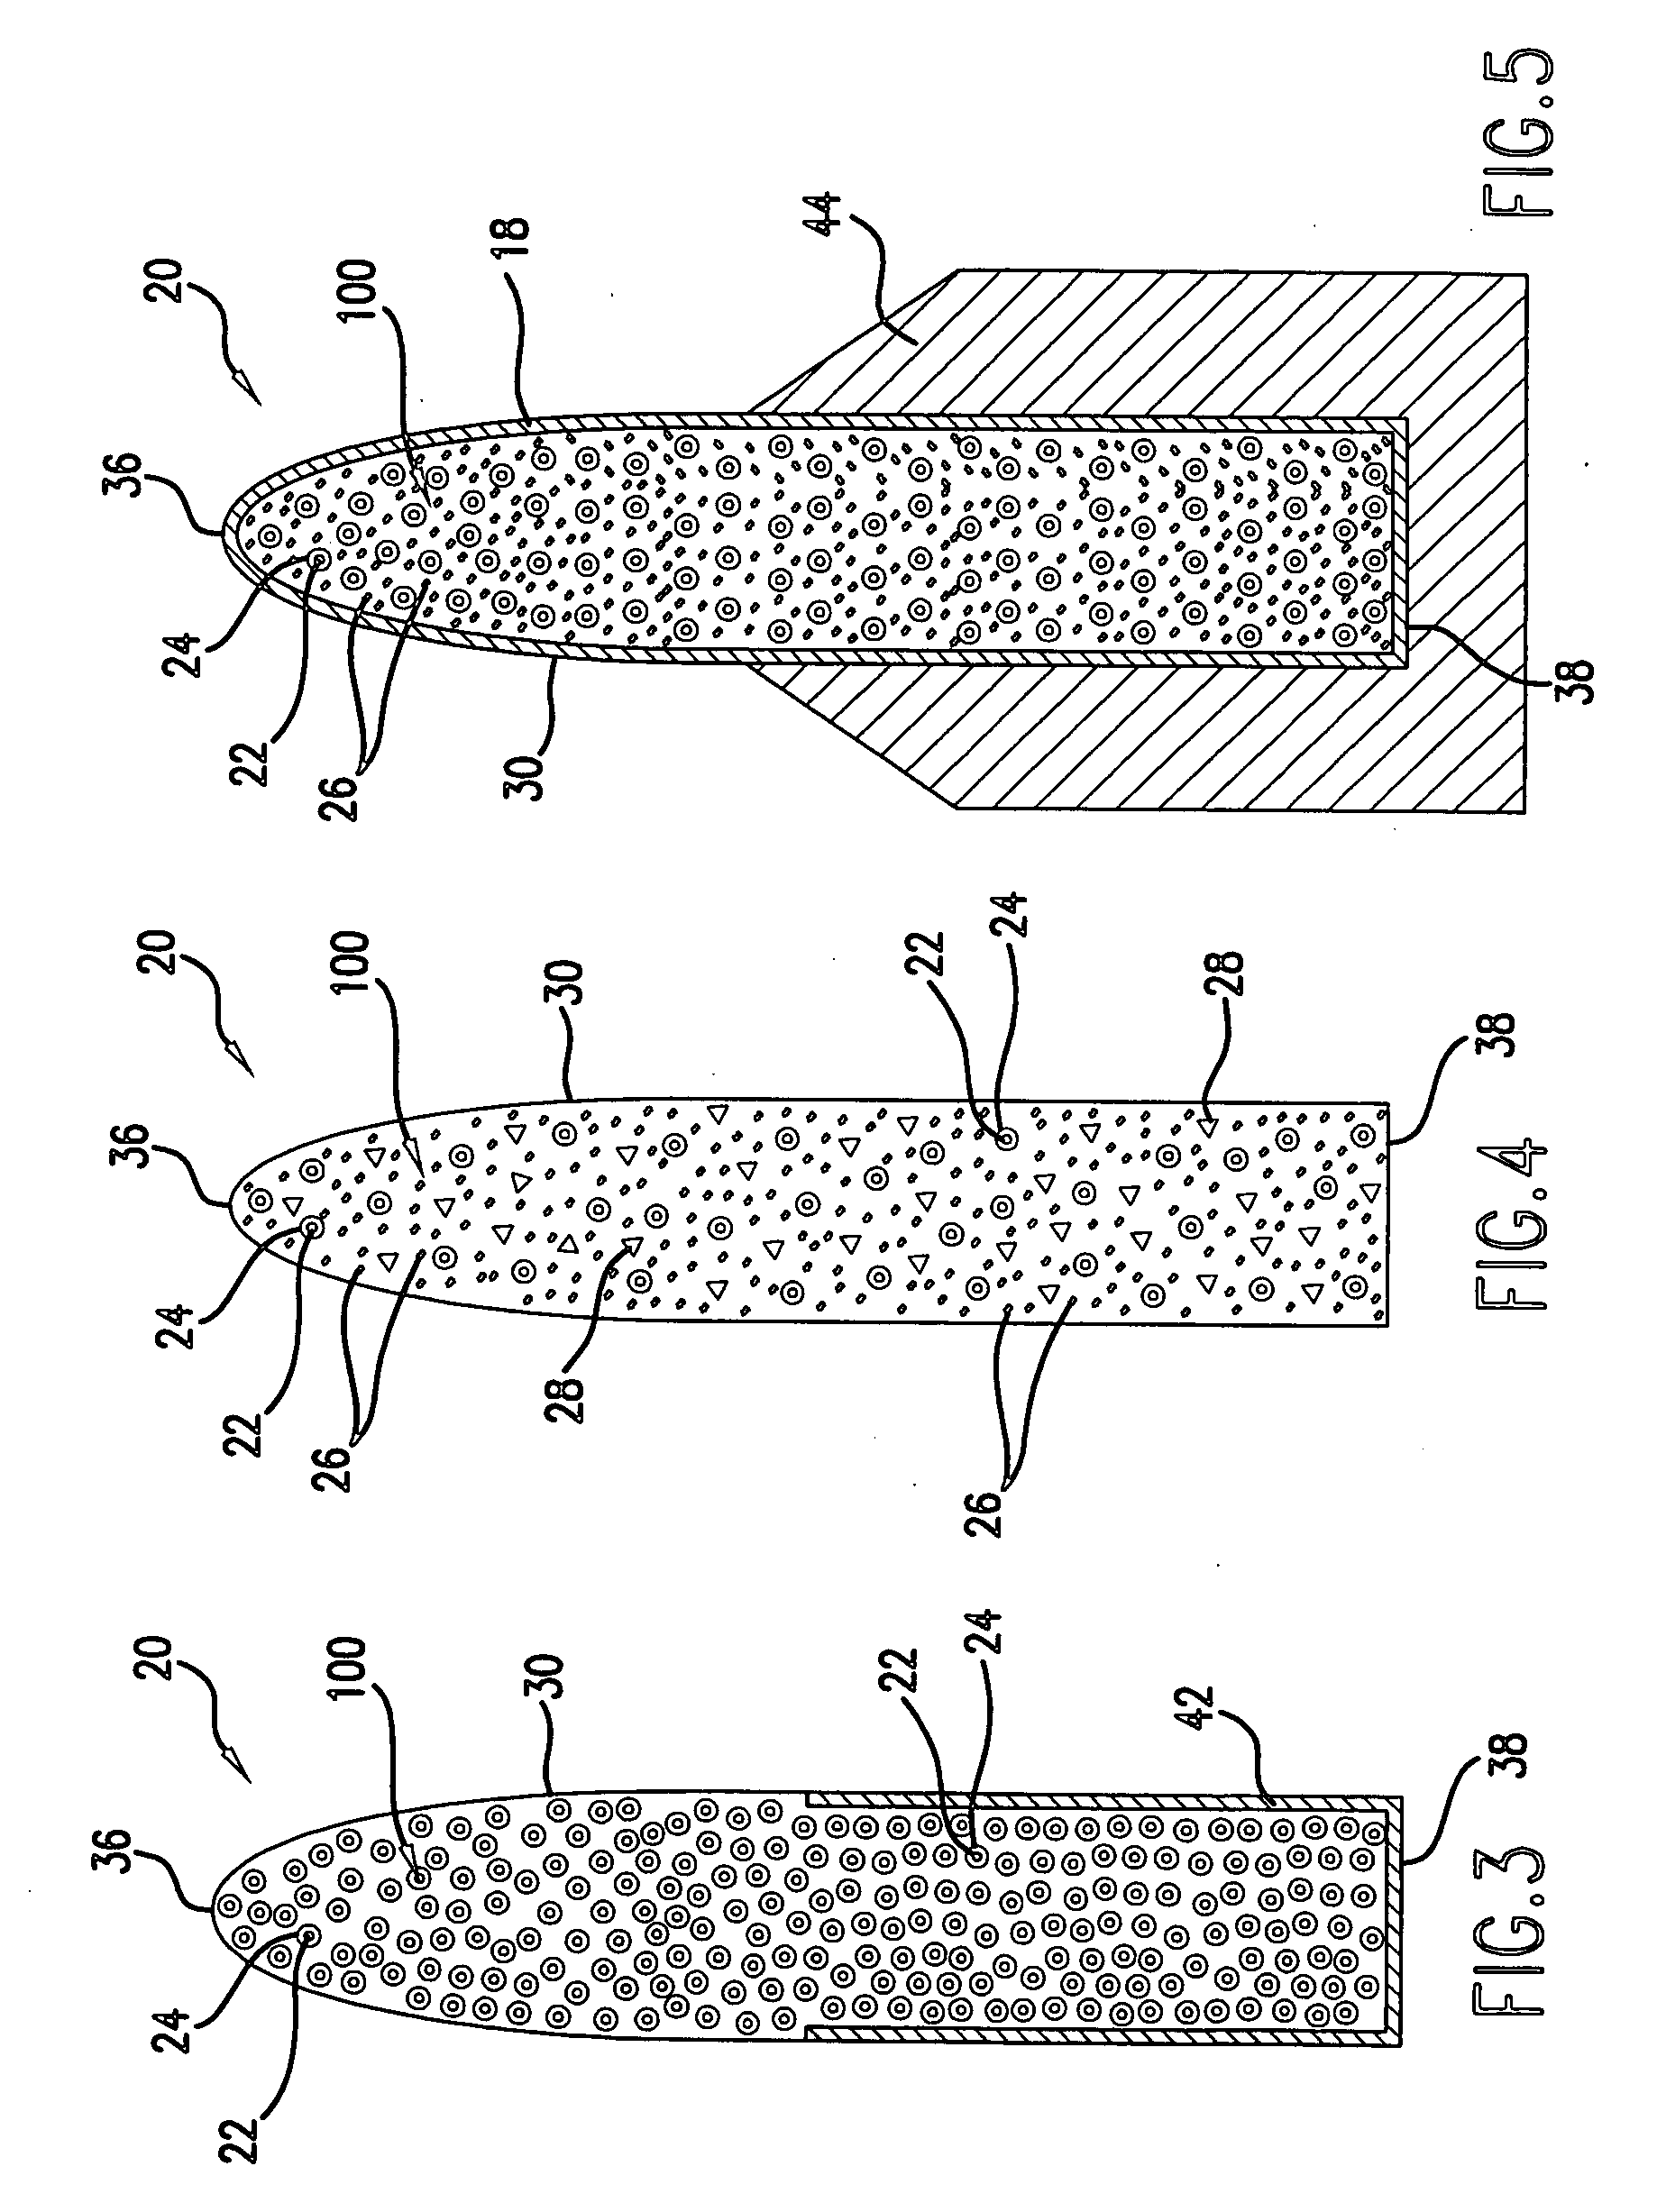 Method and apparatus for a projectile incorporating a metasable interstitial composite material